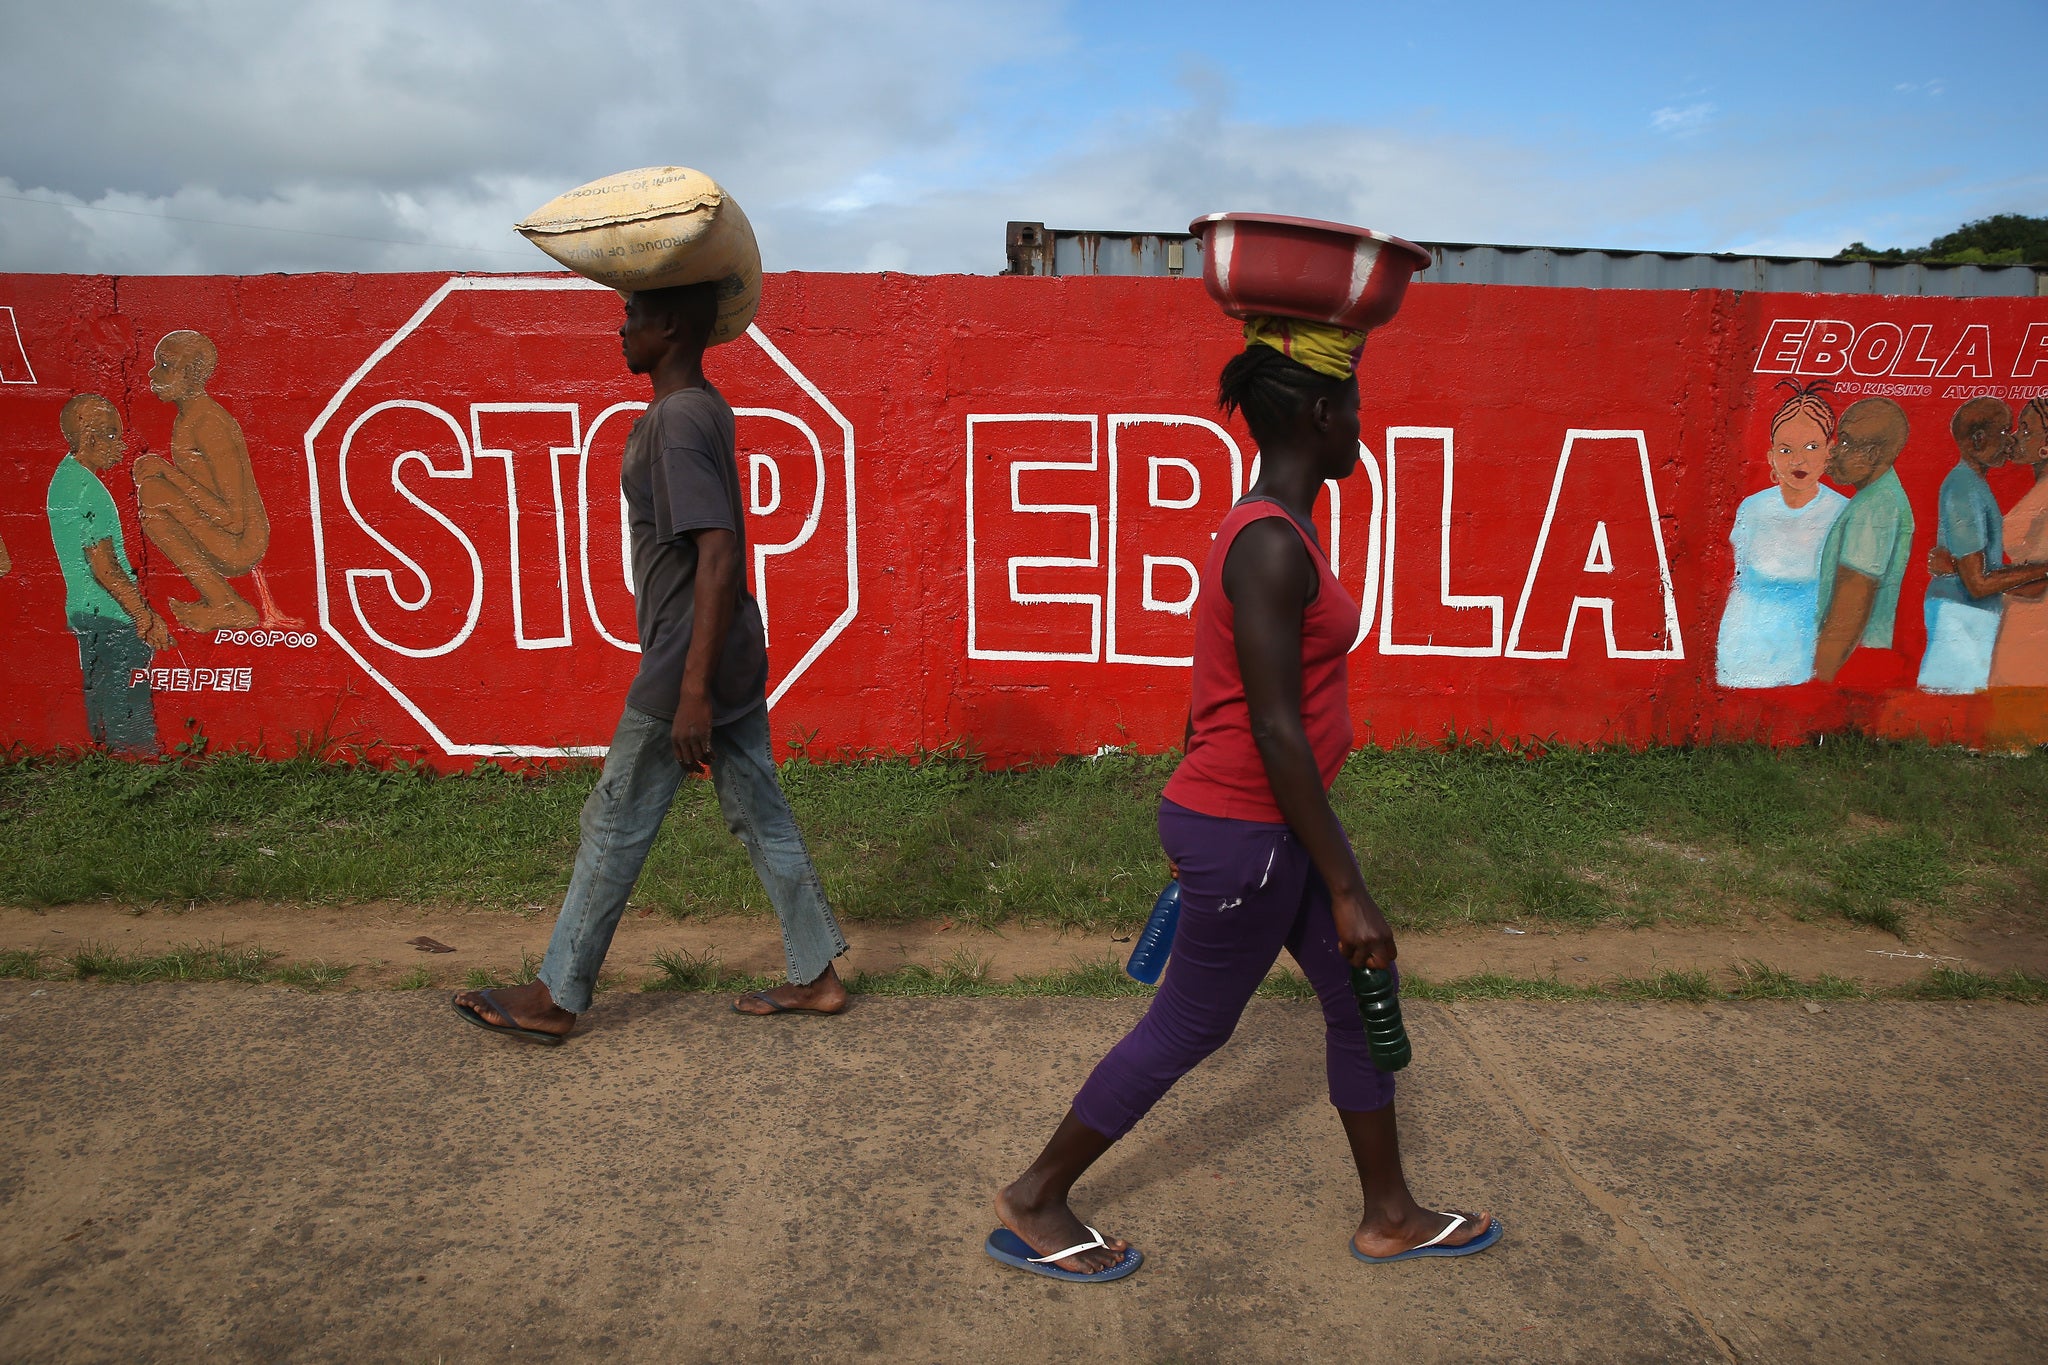 The Ebola crisis is actually getting worse in Sierra Leone